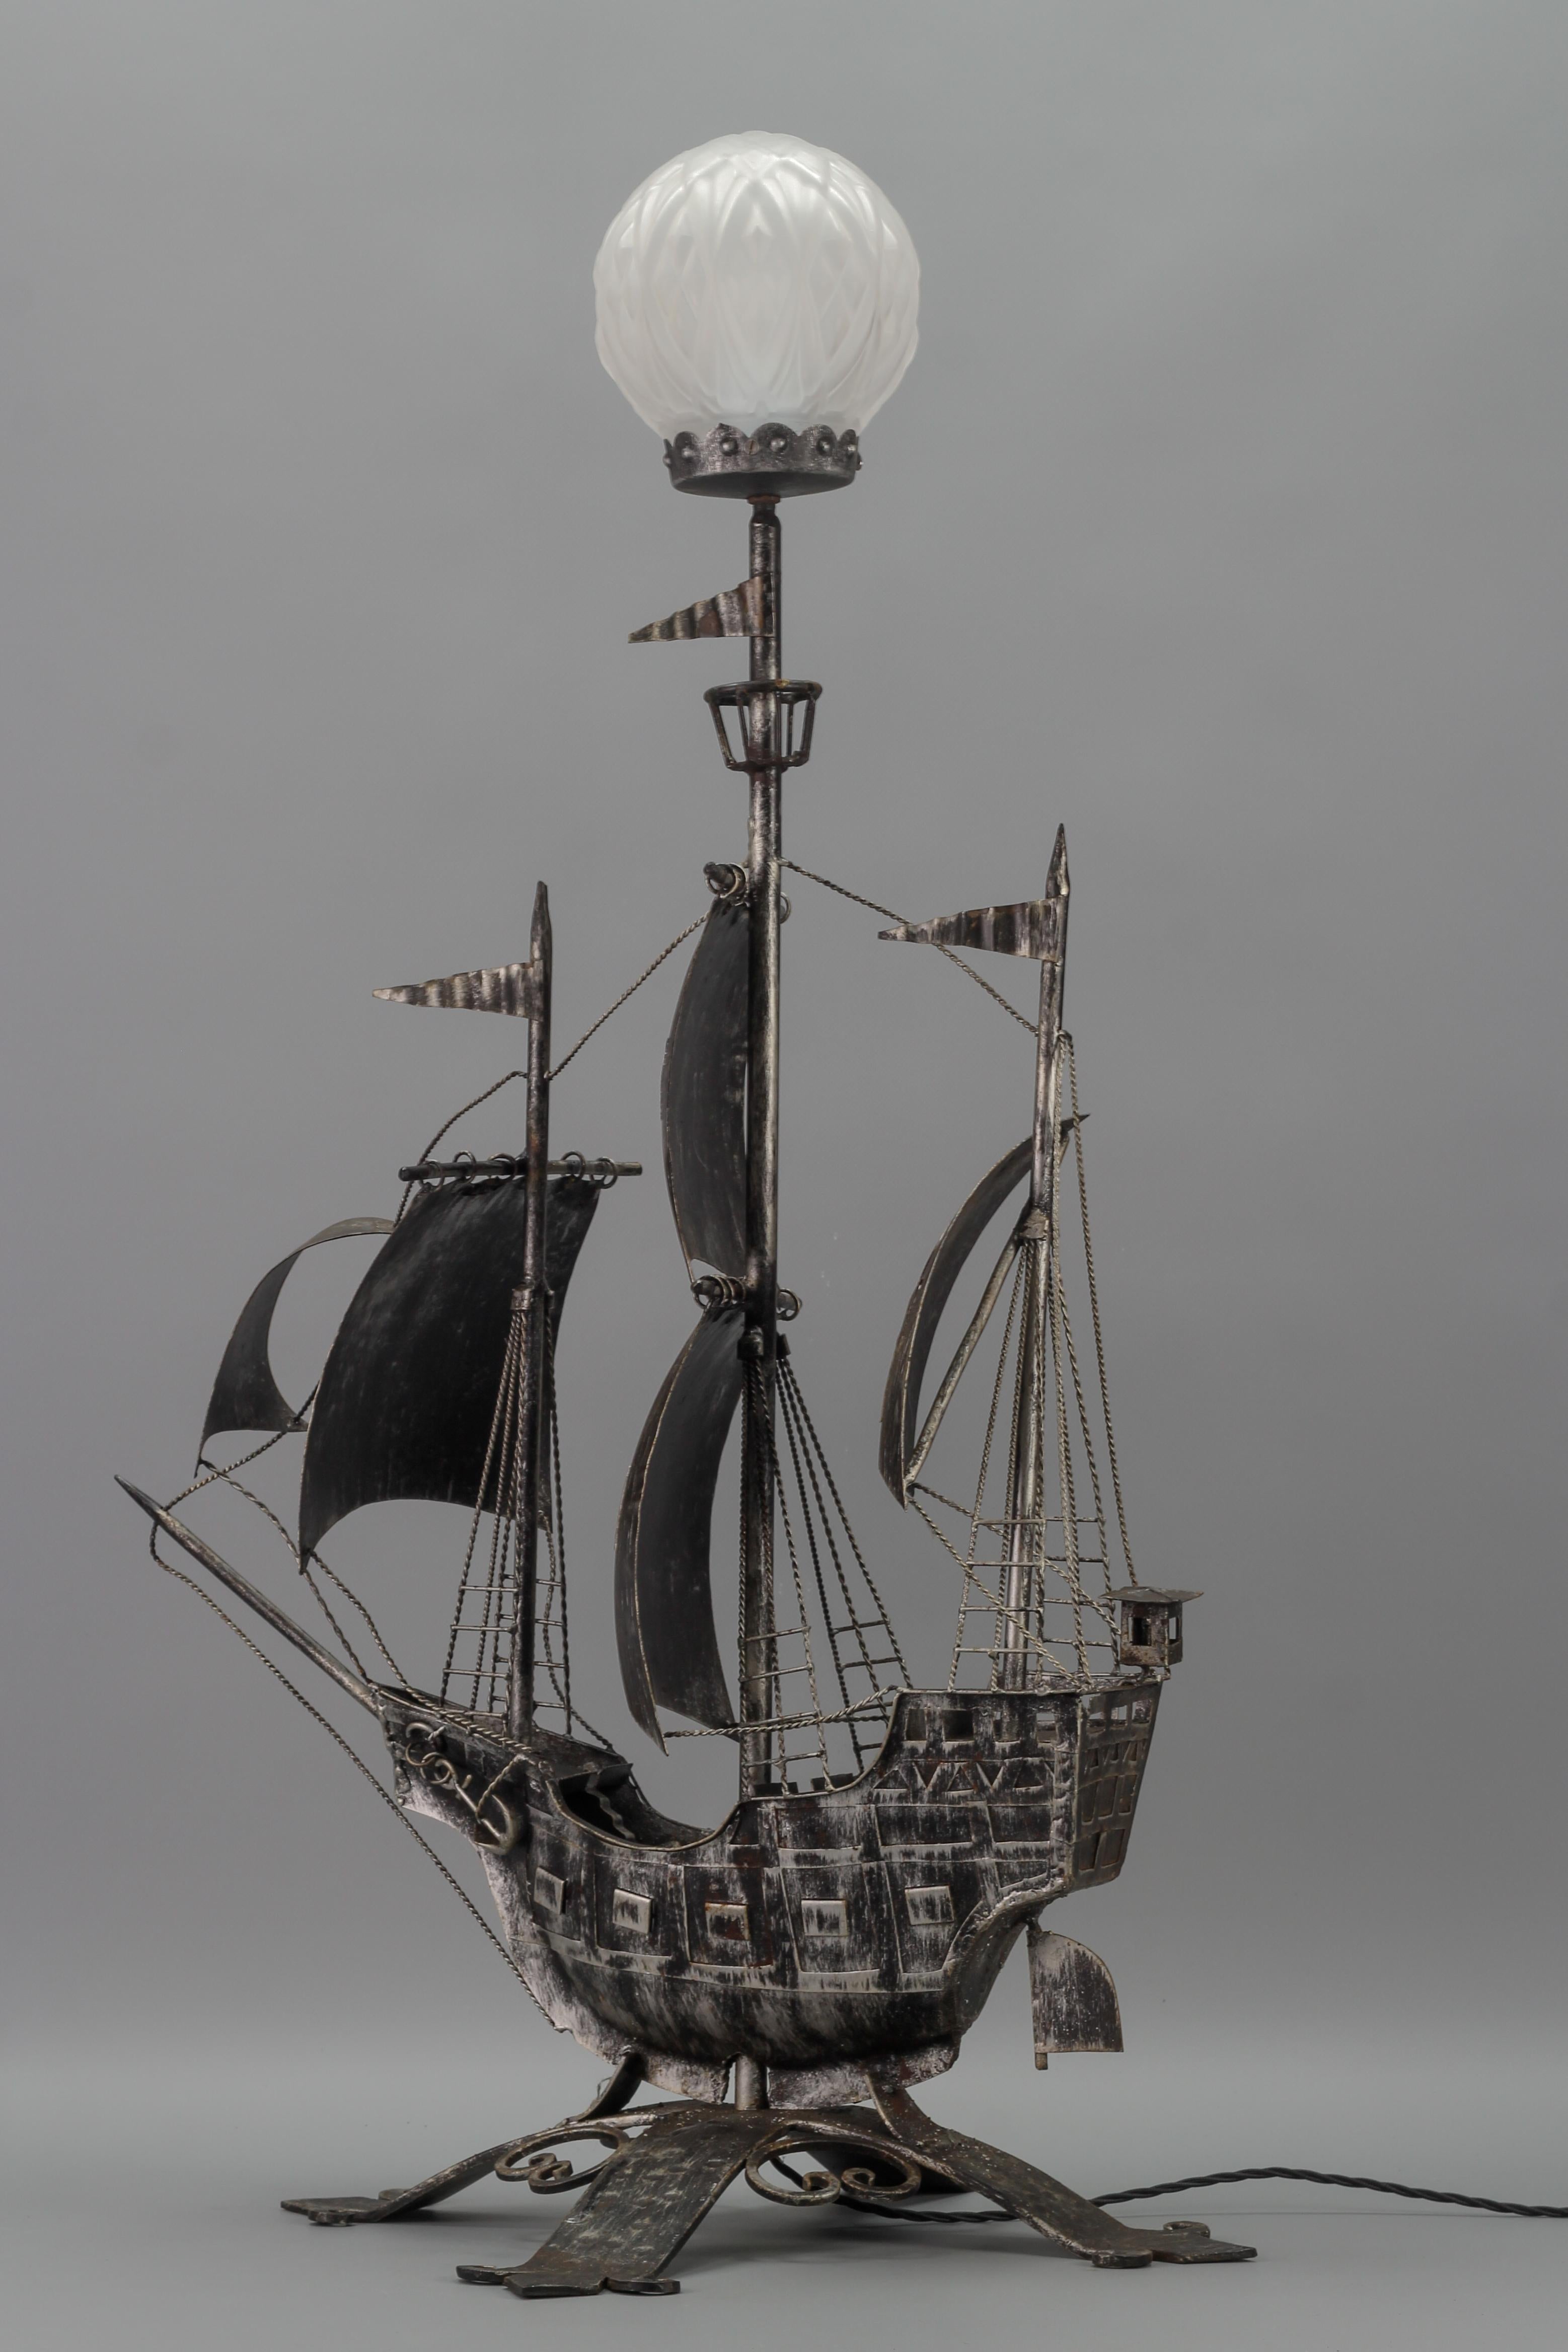 Wrought Iron and Glass Spanish Galleon Sailing Ship Shaped floor lamp, the 1950s
The impressive silver-colored iron floor lamp represents a beautiful Spanish galleon with three masts and sailing ship details such as sails, ropes, anchor, and flags.